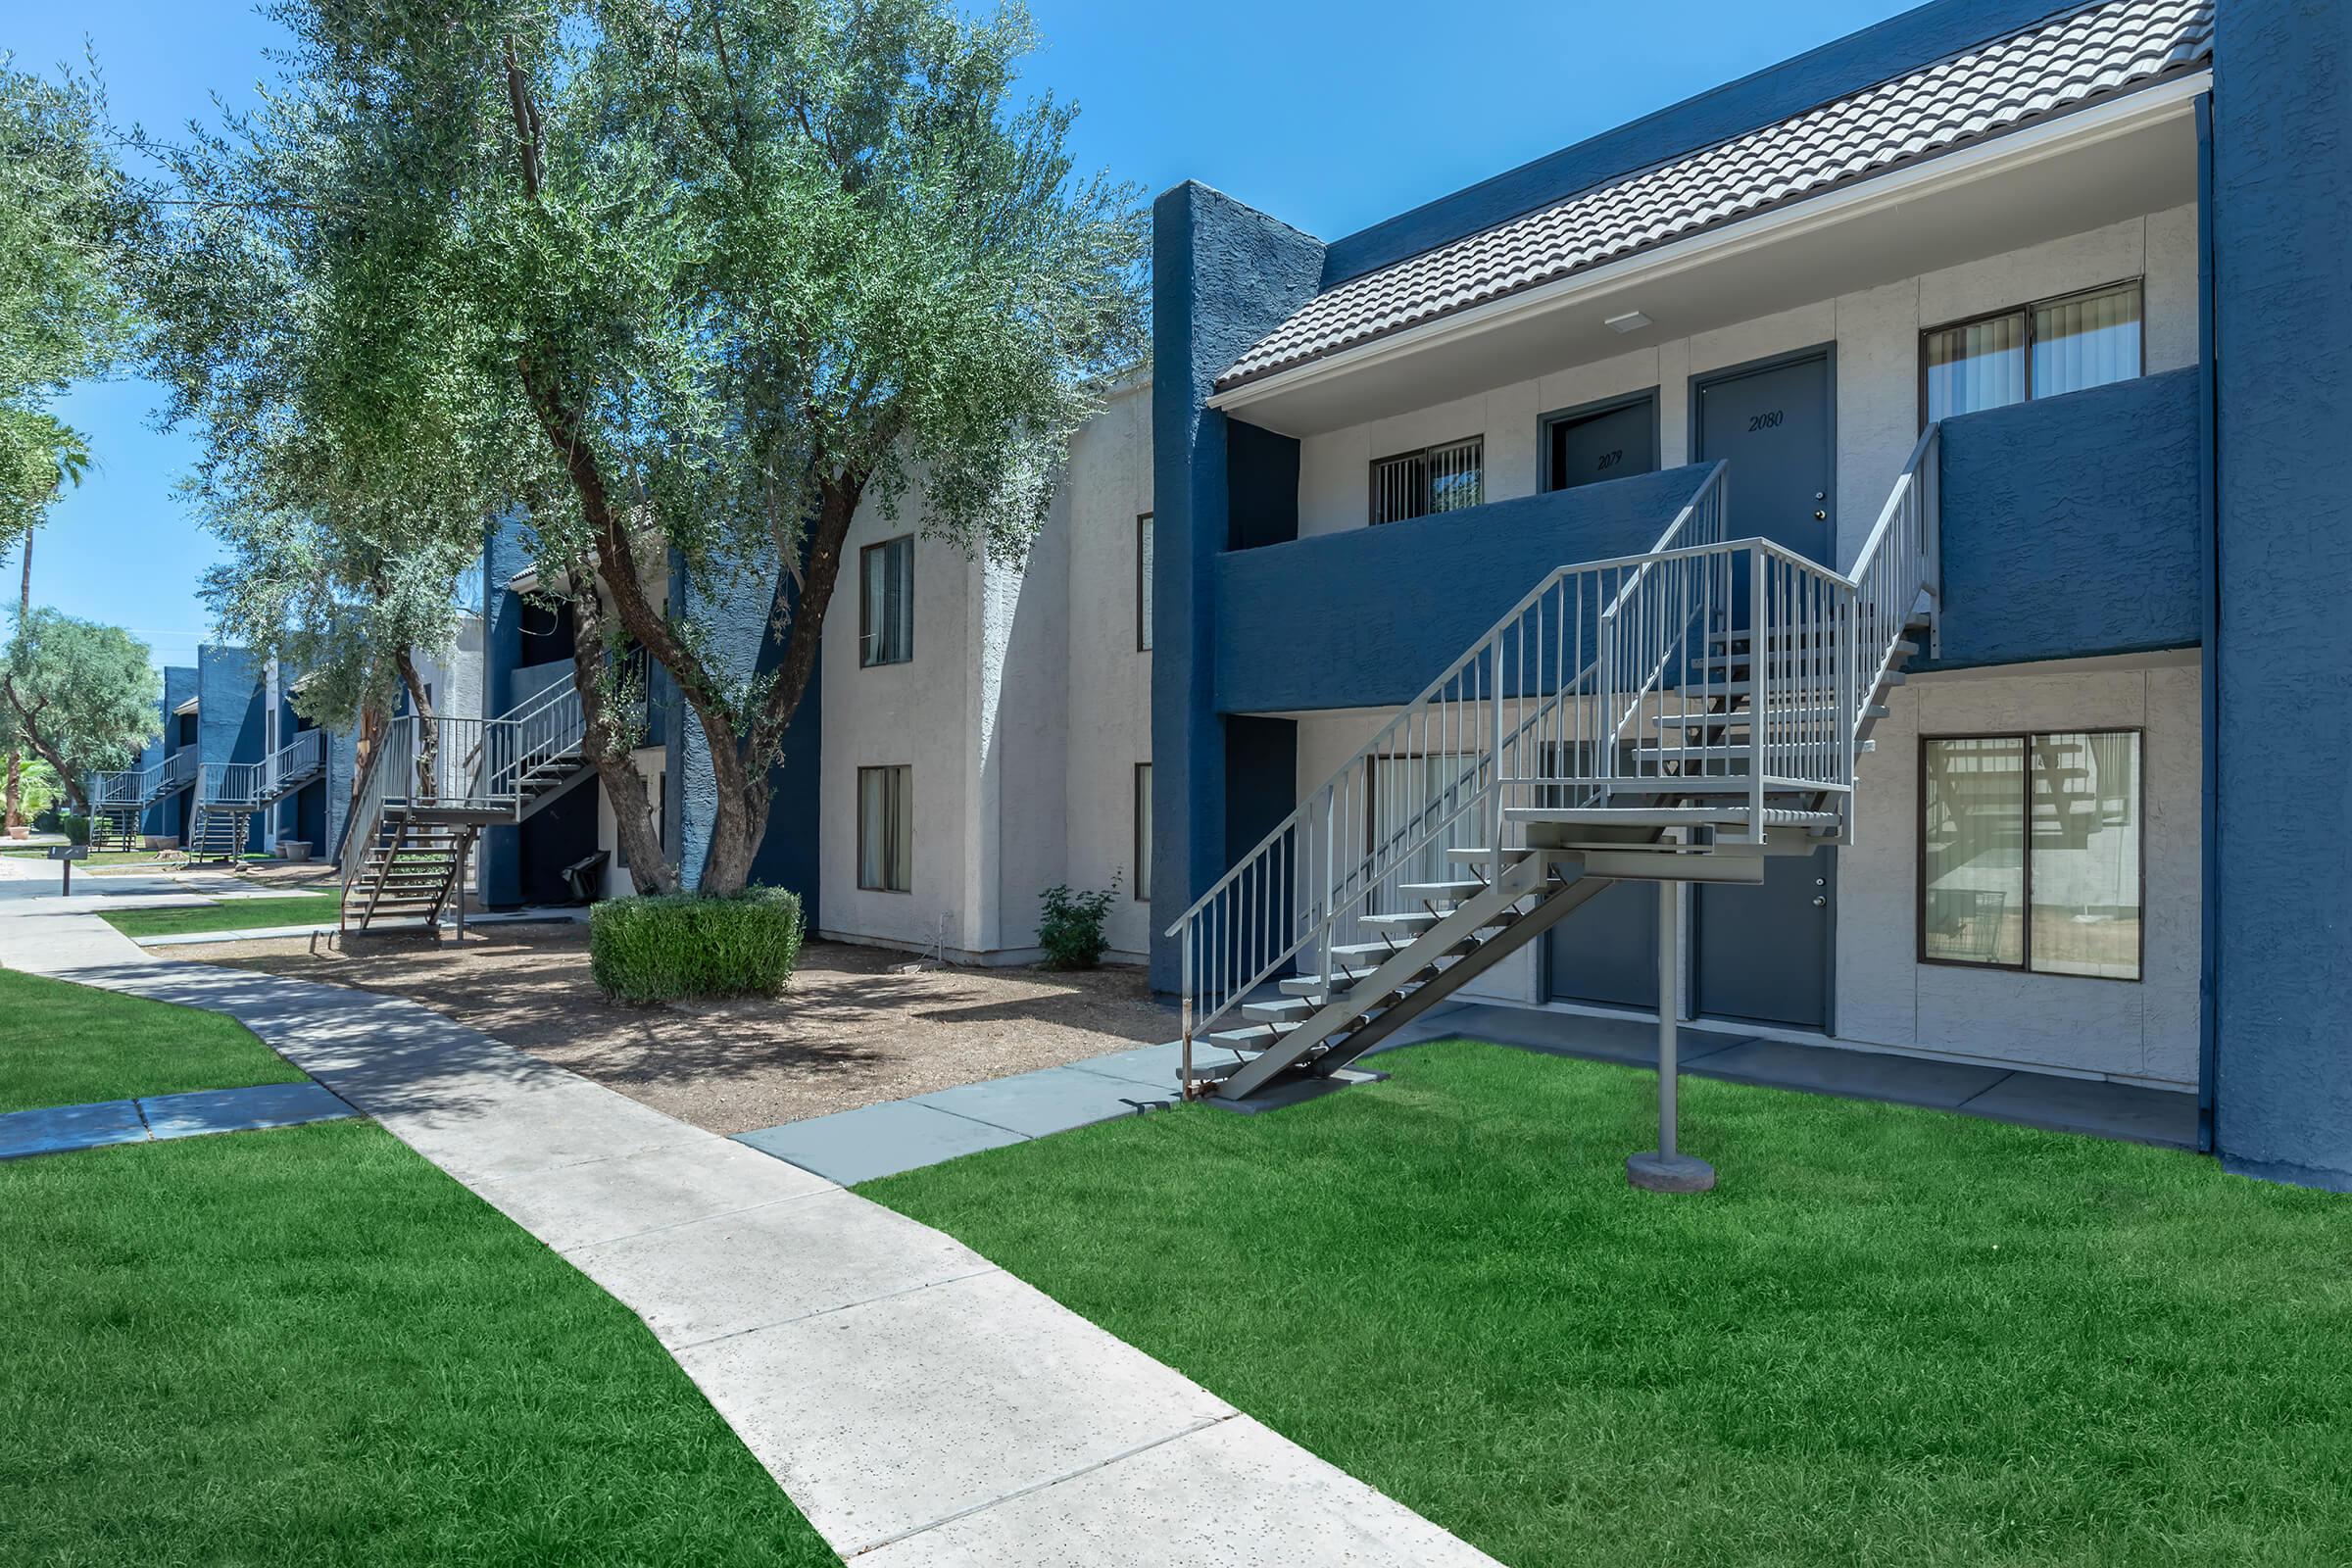 Blue and grey exterior apartment building tucked behind grass and sidewalk walkway